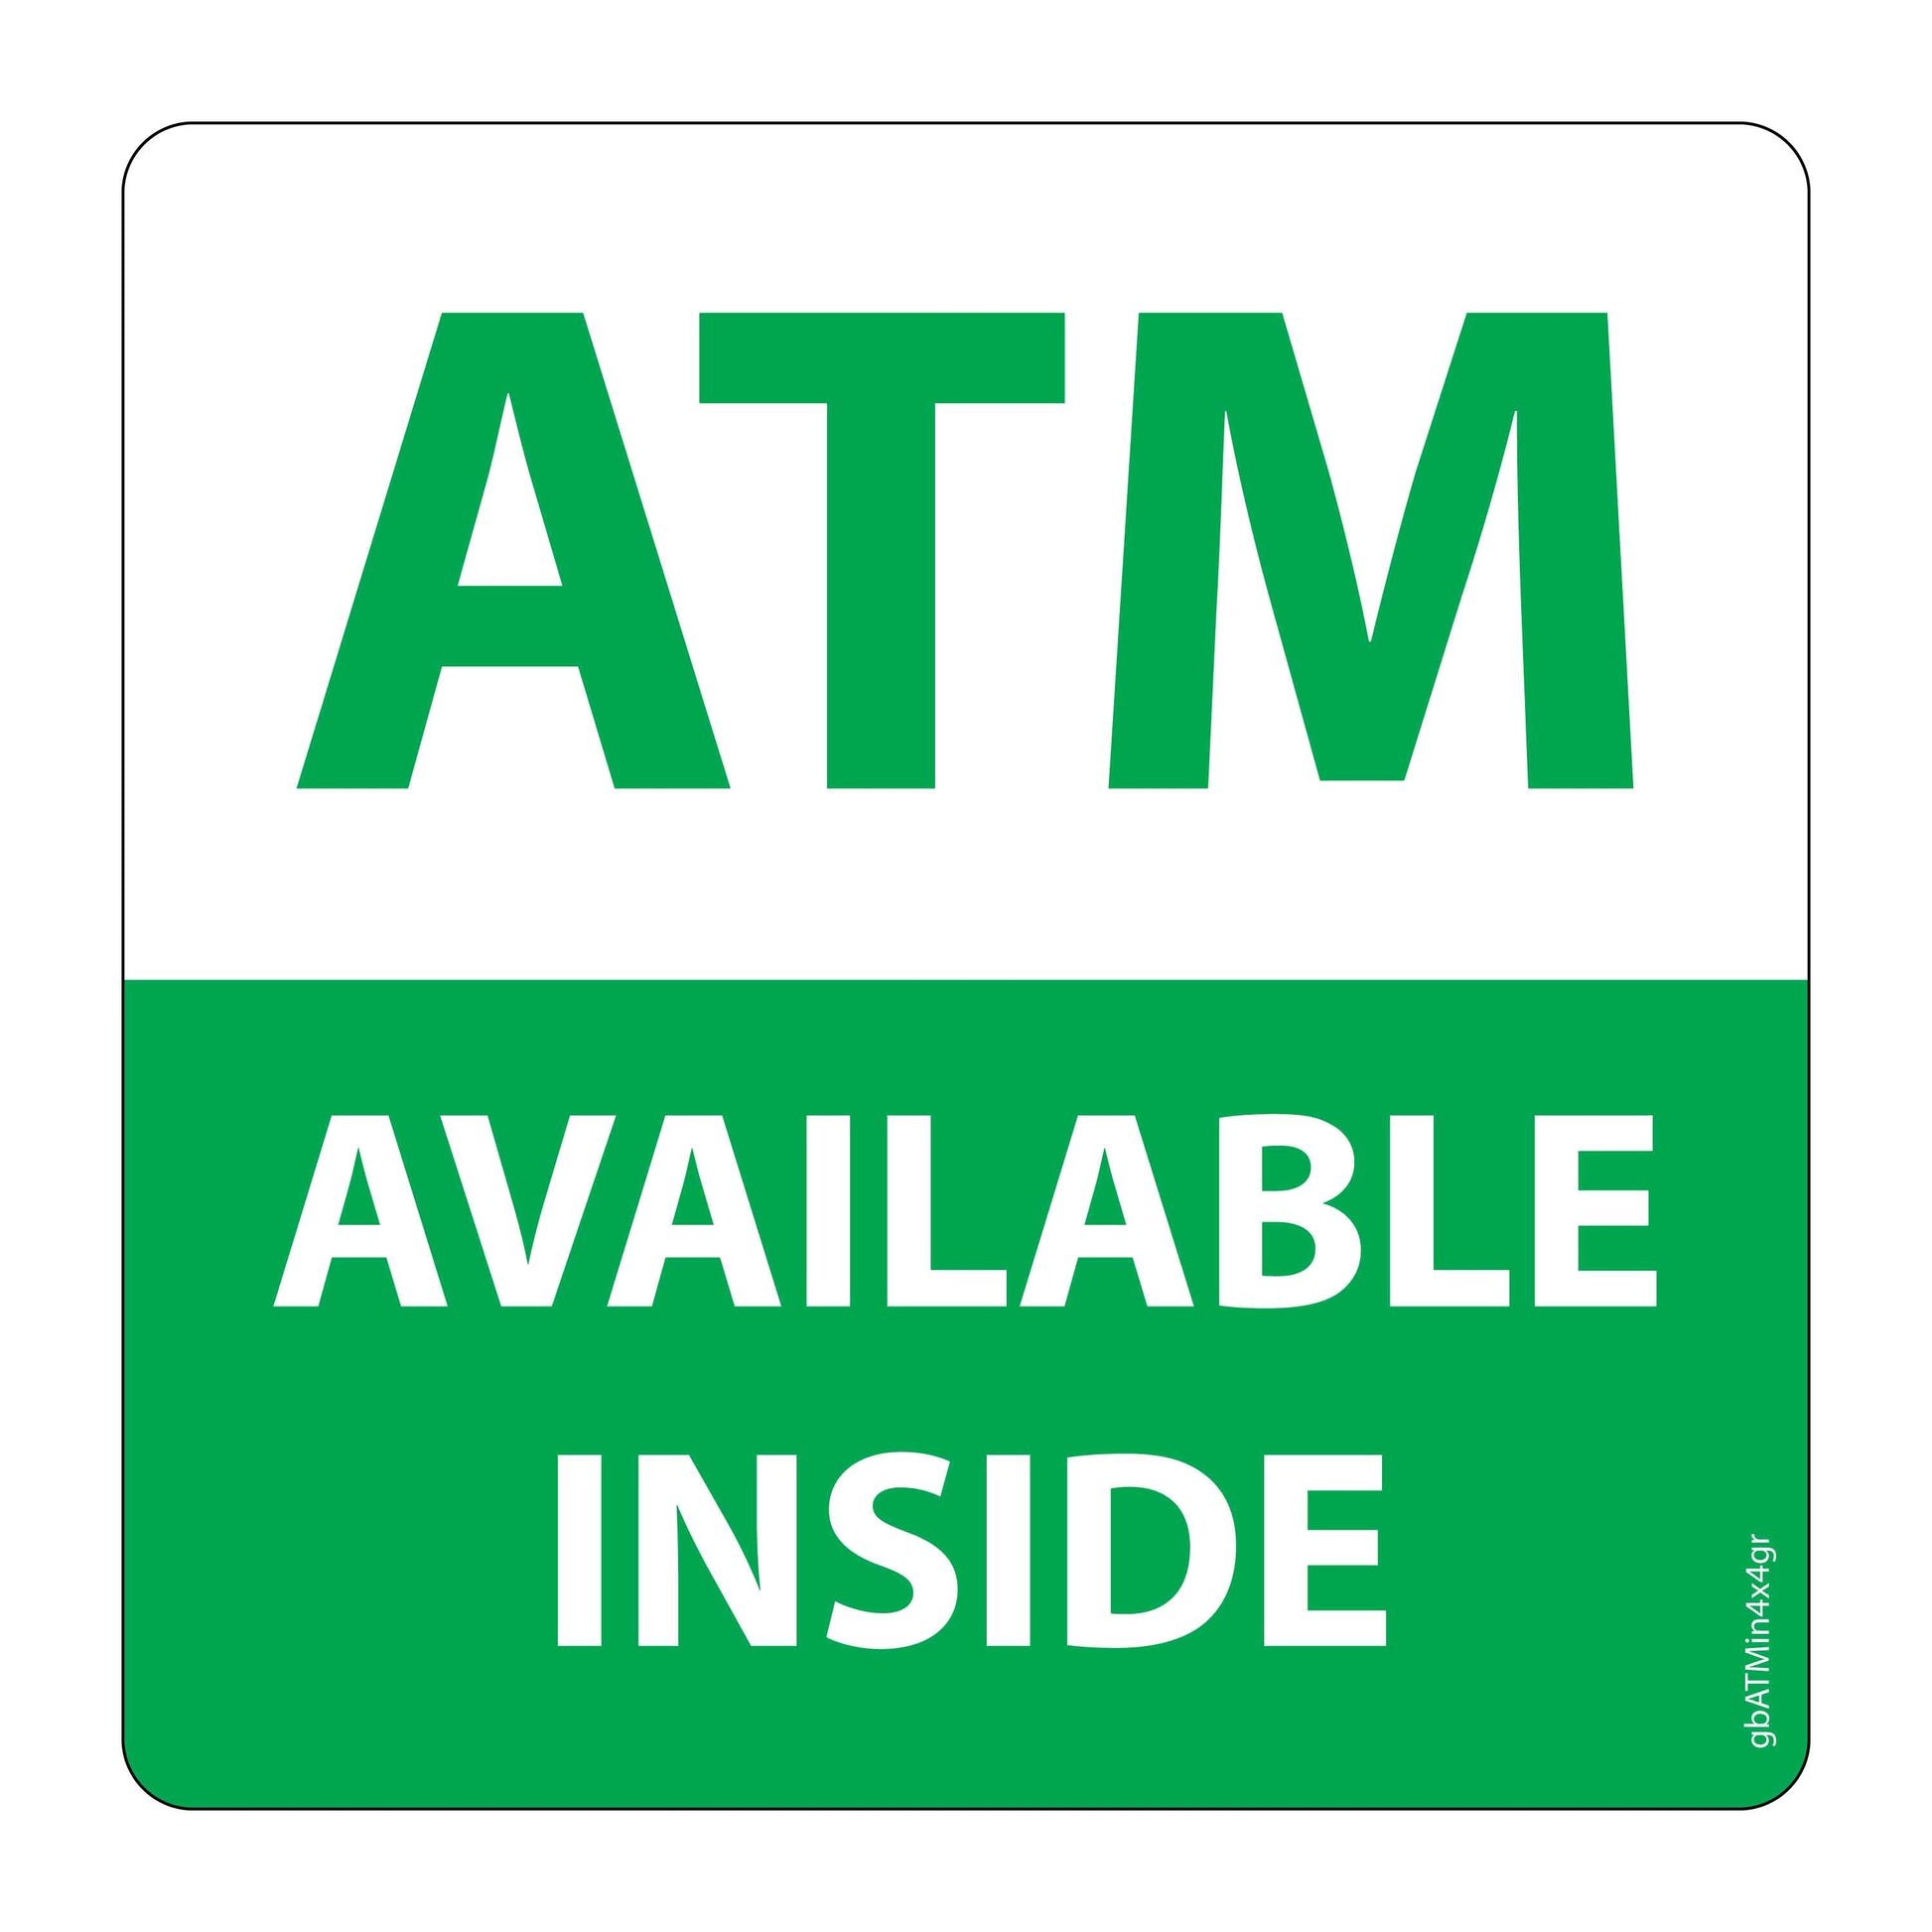 ATM Available Inside, Green and White Decal. 4 inches by 4 inches in size. 